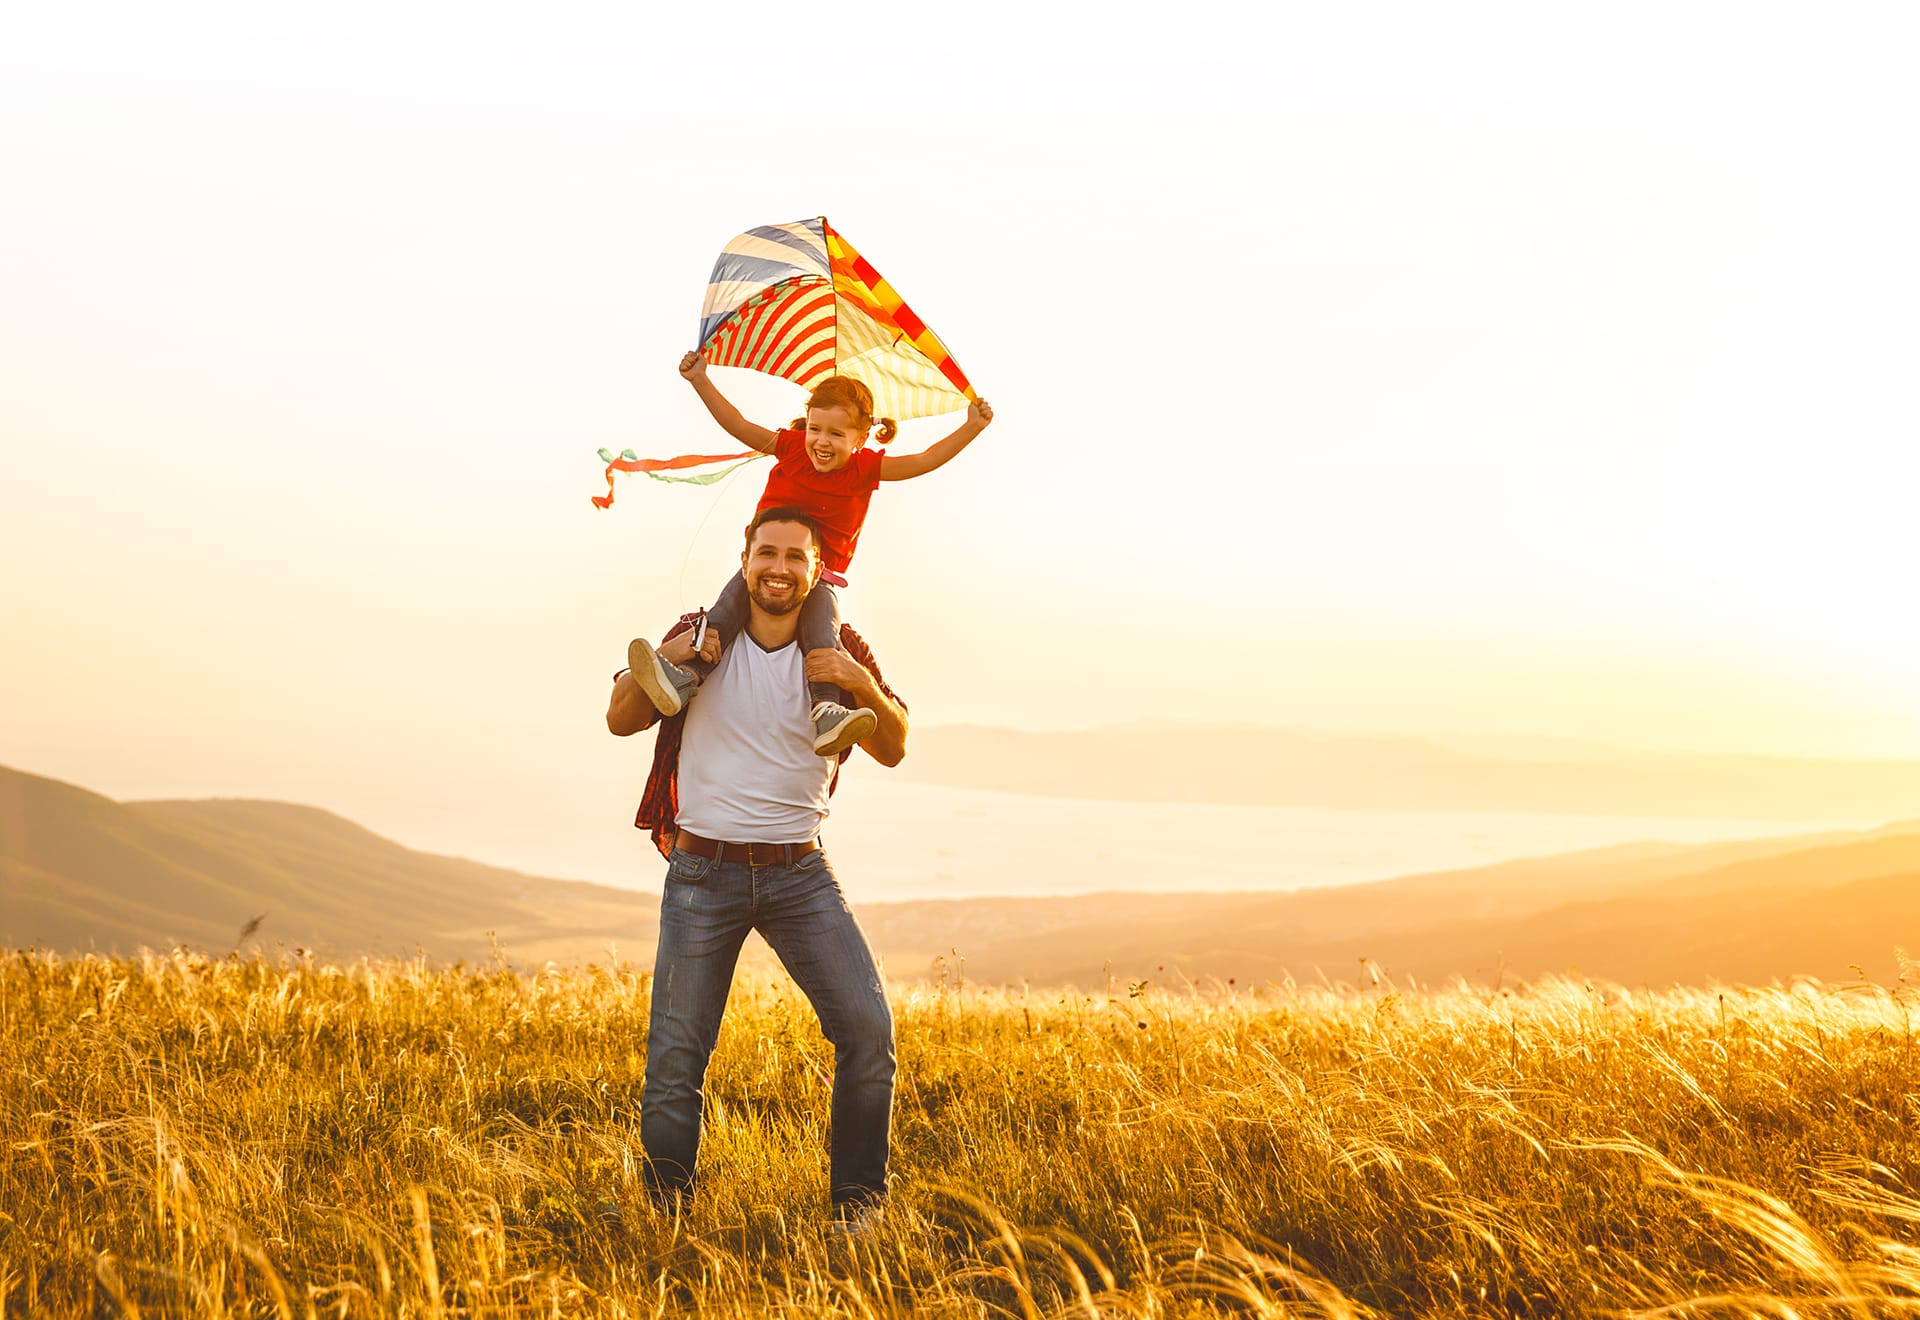 Out of Town Vasectomy Reversal Patients | Dr. Werthman